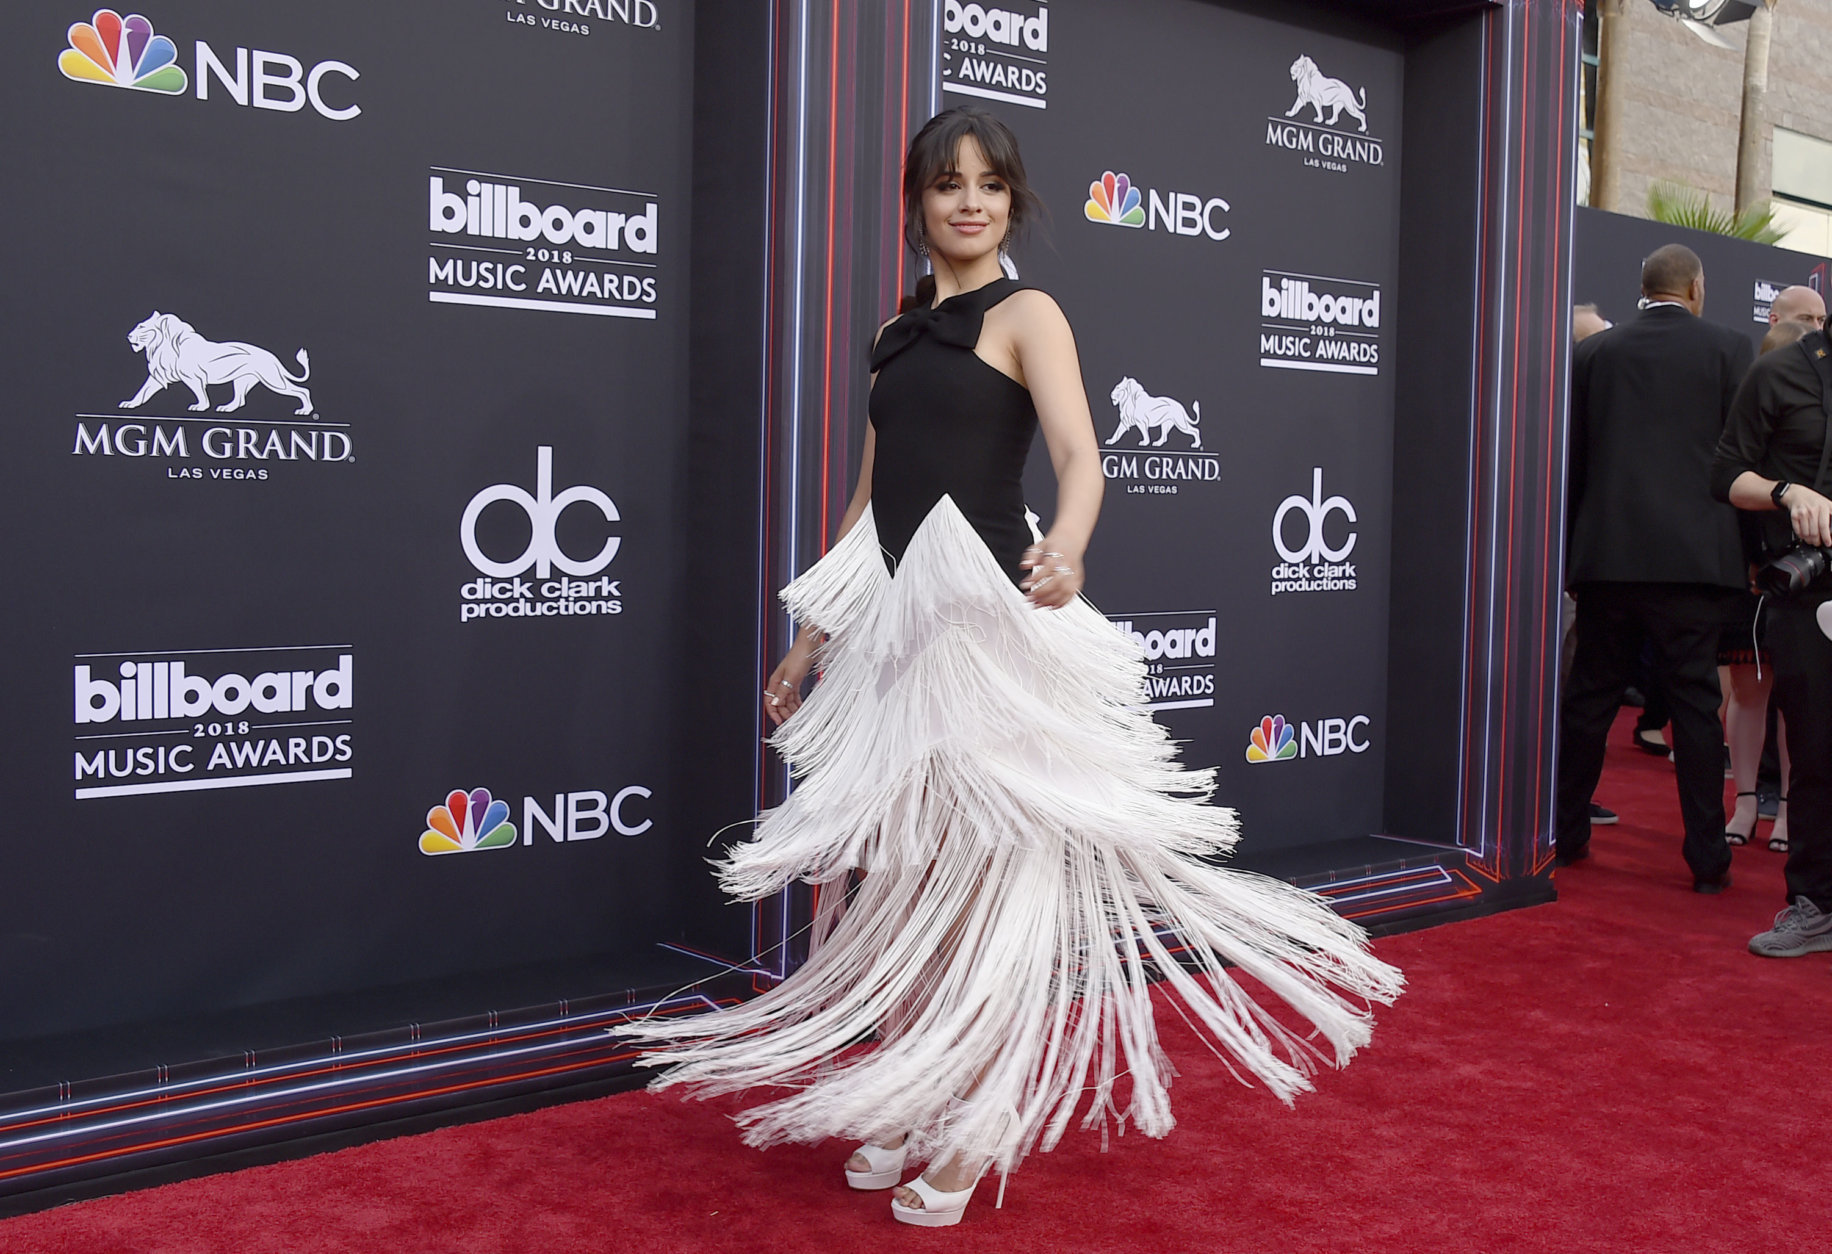 Camila Cabello arrives at the Billboard Music Awards at the MGM Grand Garden Arena on Sunday, May 20, 2018, in Las Vegas. (Photo by Jordan Strauss/Invision/AP)